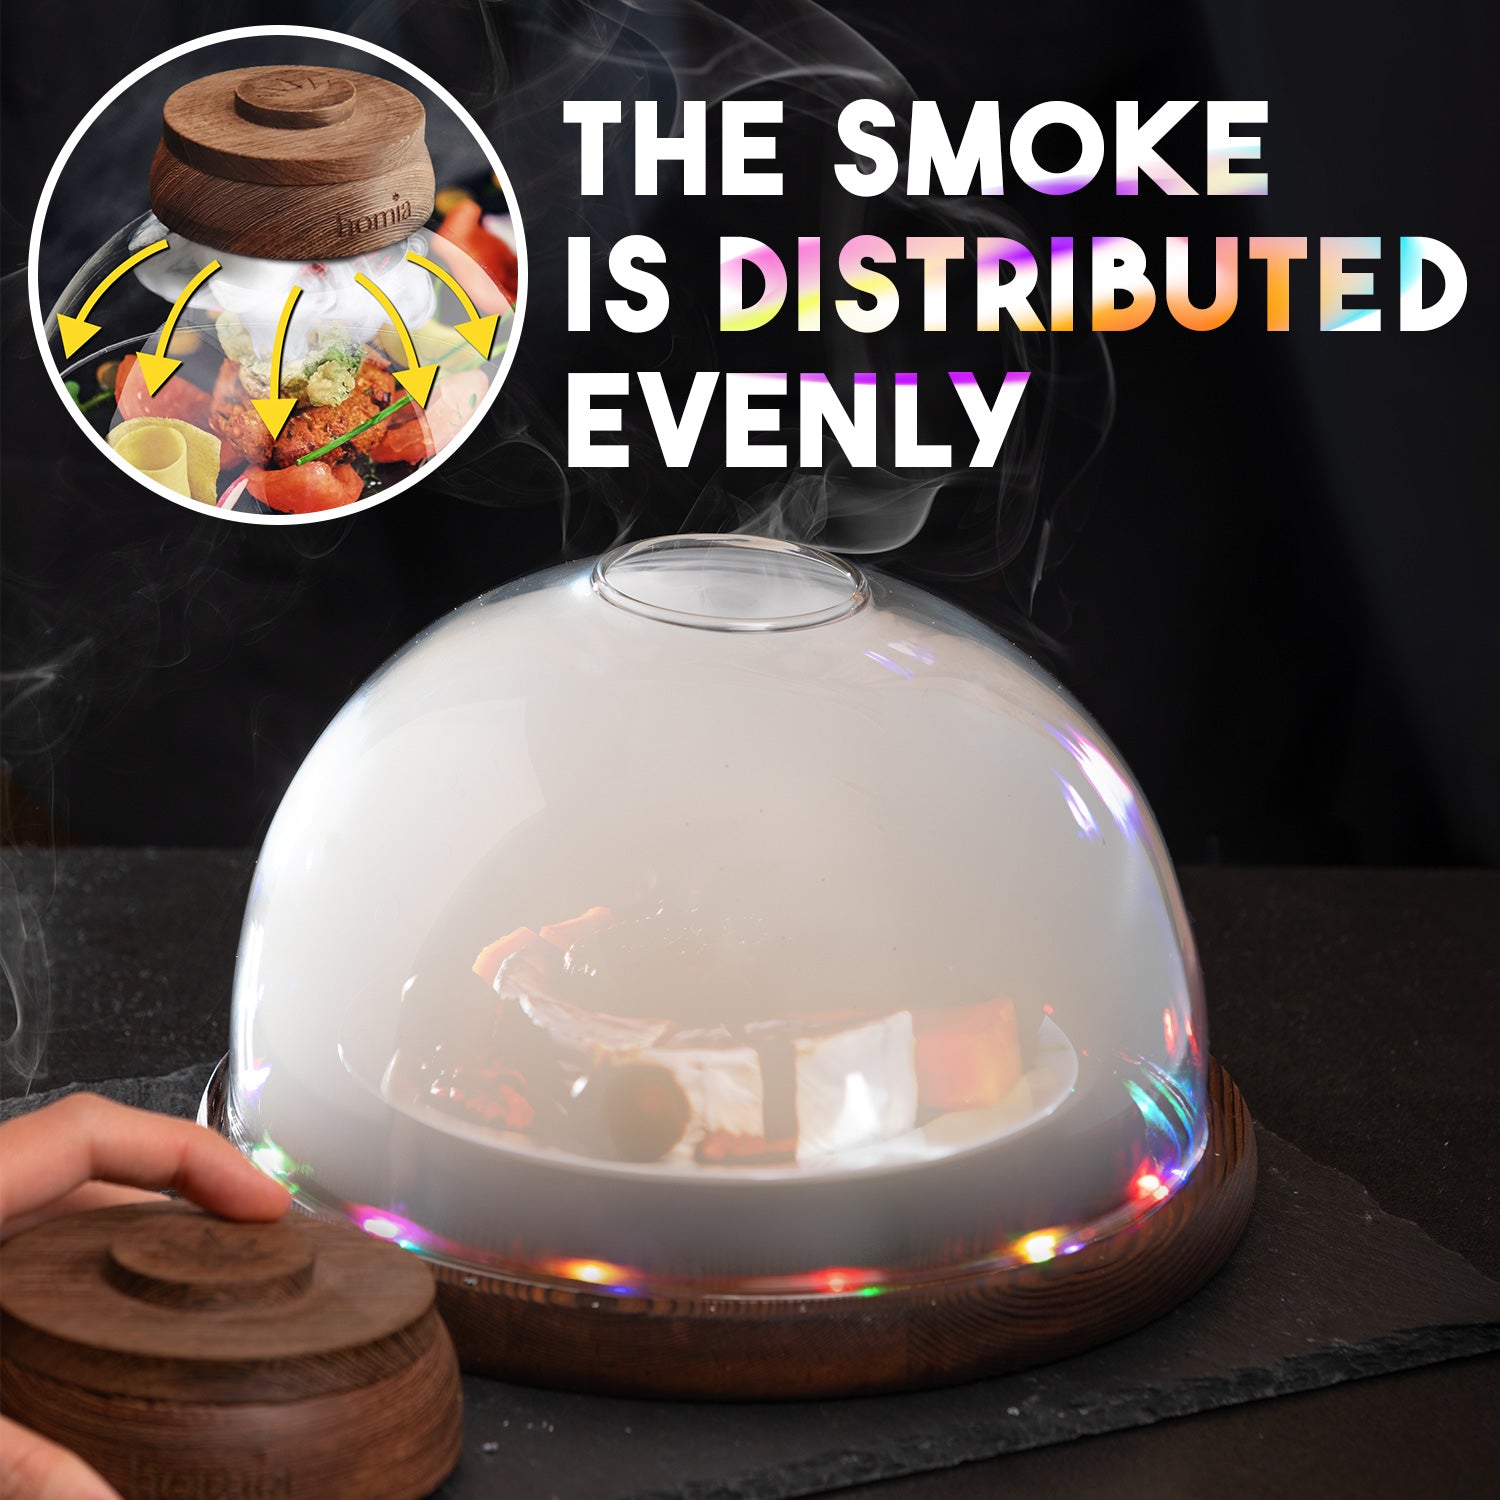 Drink Smoker Kit with LED Wooden Base & Wide Glass Dome